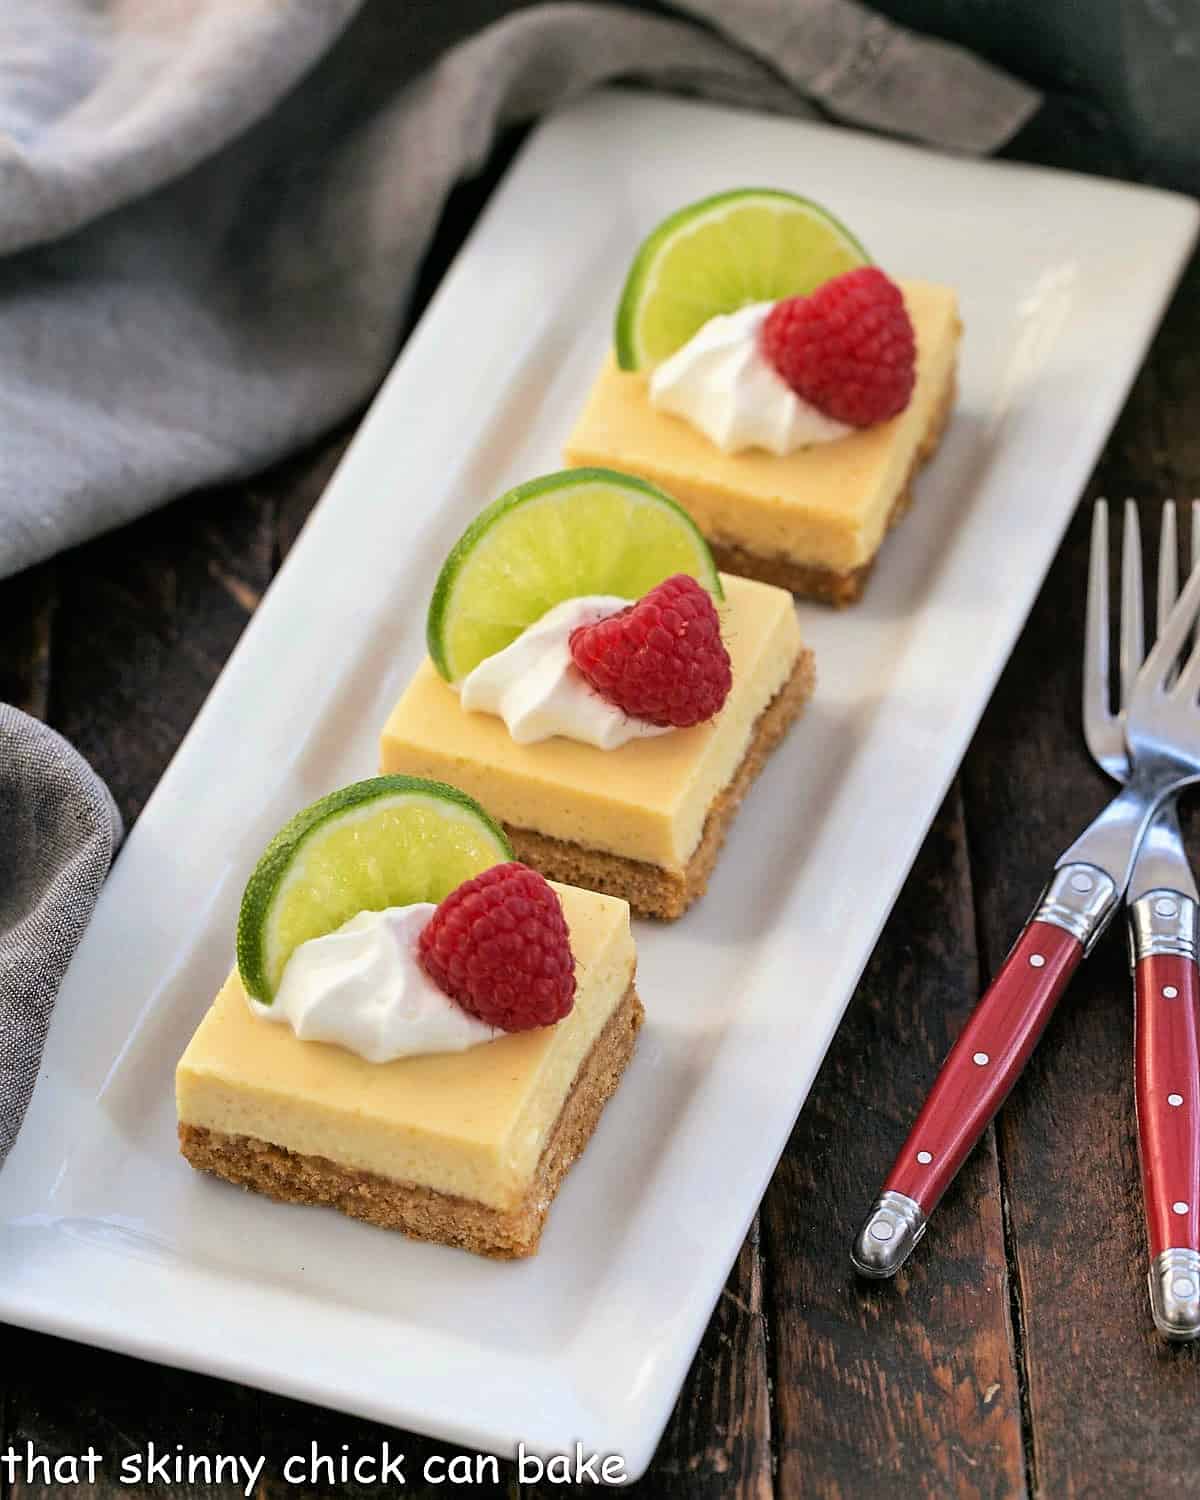 3 key lime pie bars garnished with whipped cream, lime slices and fresh raspberries.